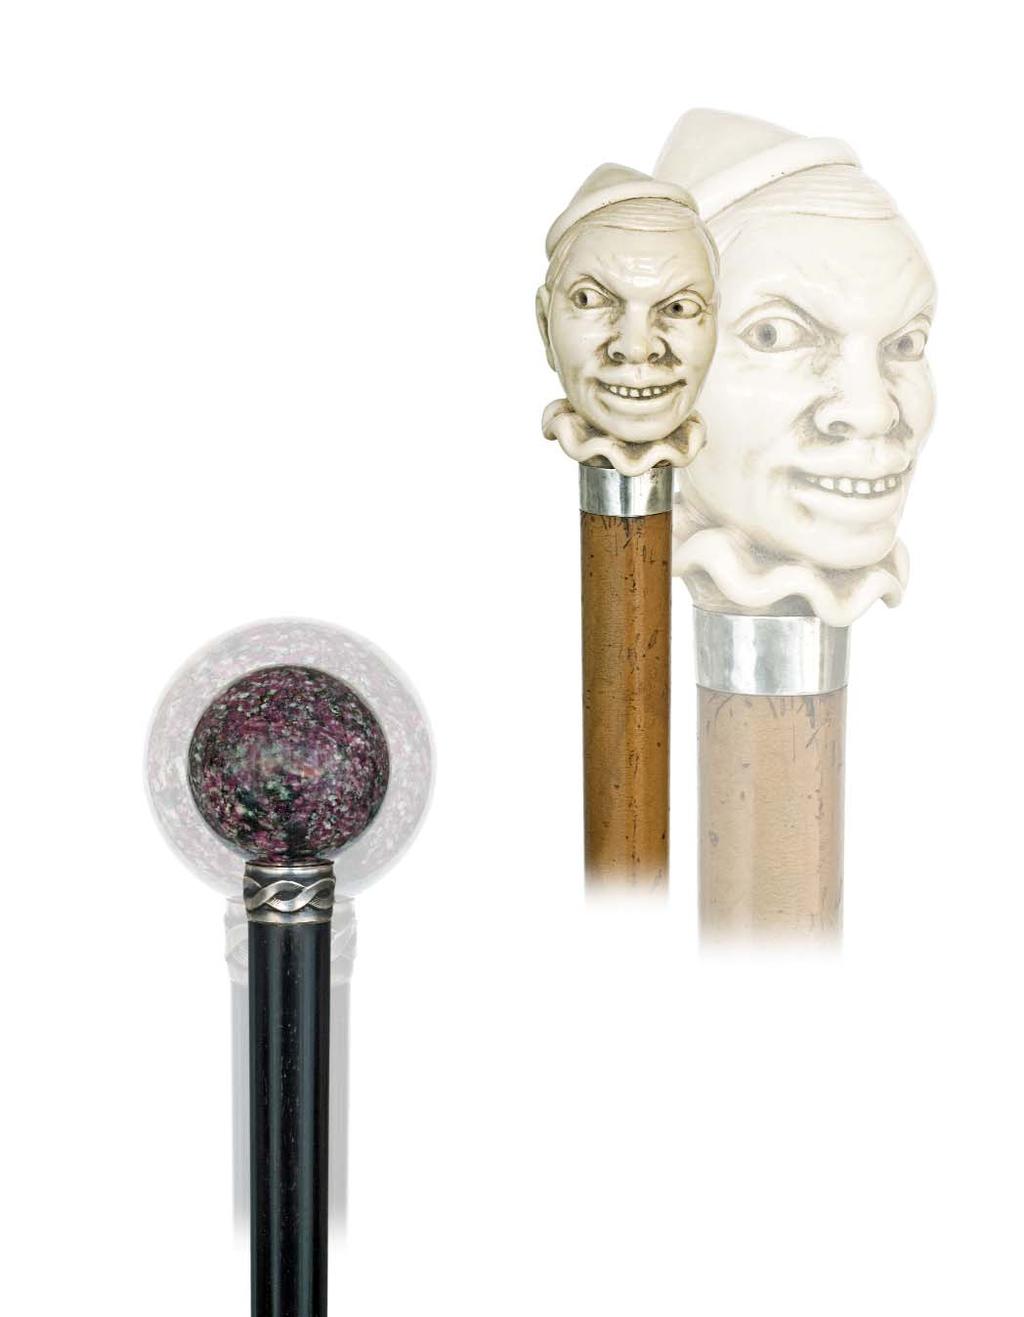 59. Ivory Pierrot Cane Sizeable ivory head with a smiling face, frill collar and bonnet, full bark malacca shaft with silver collar and a horn ferrule.